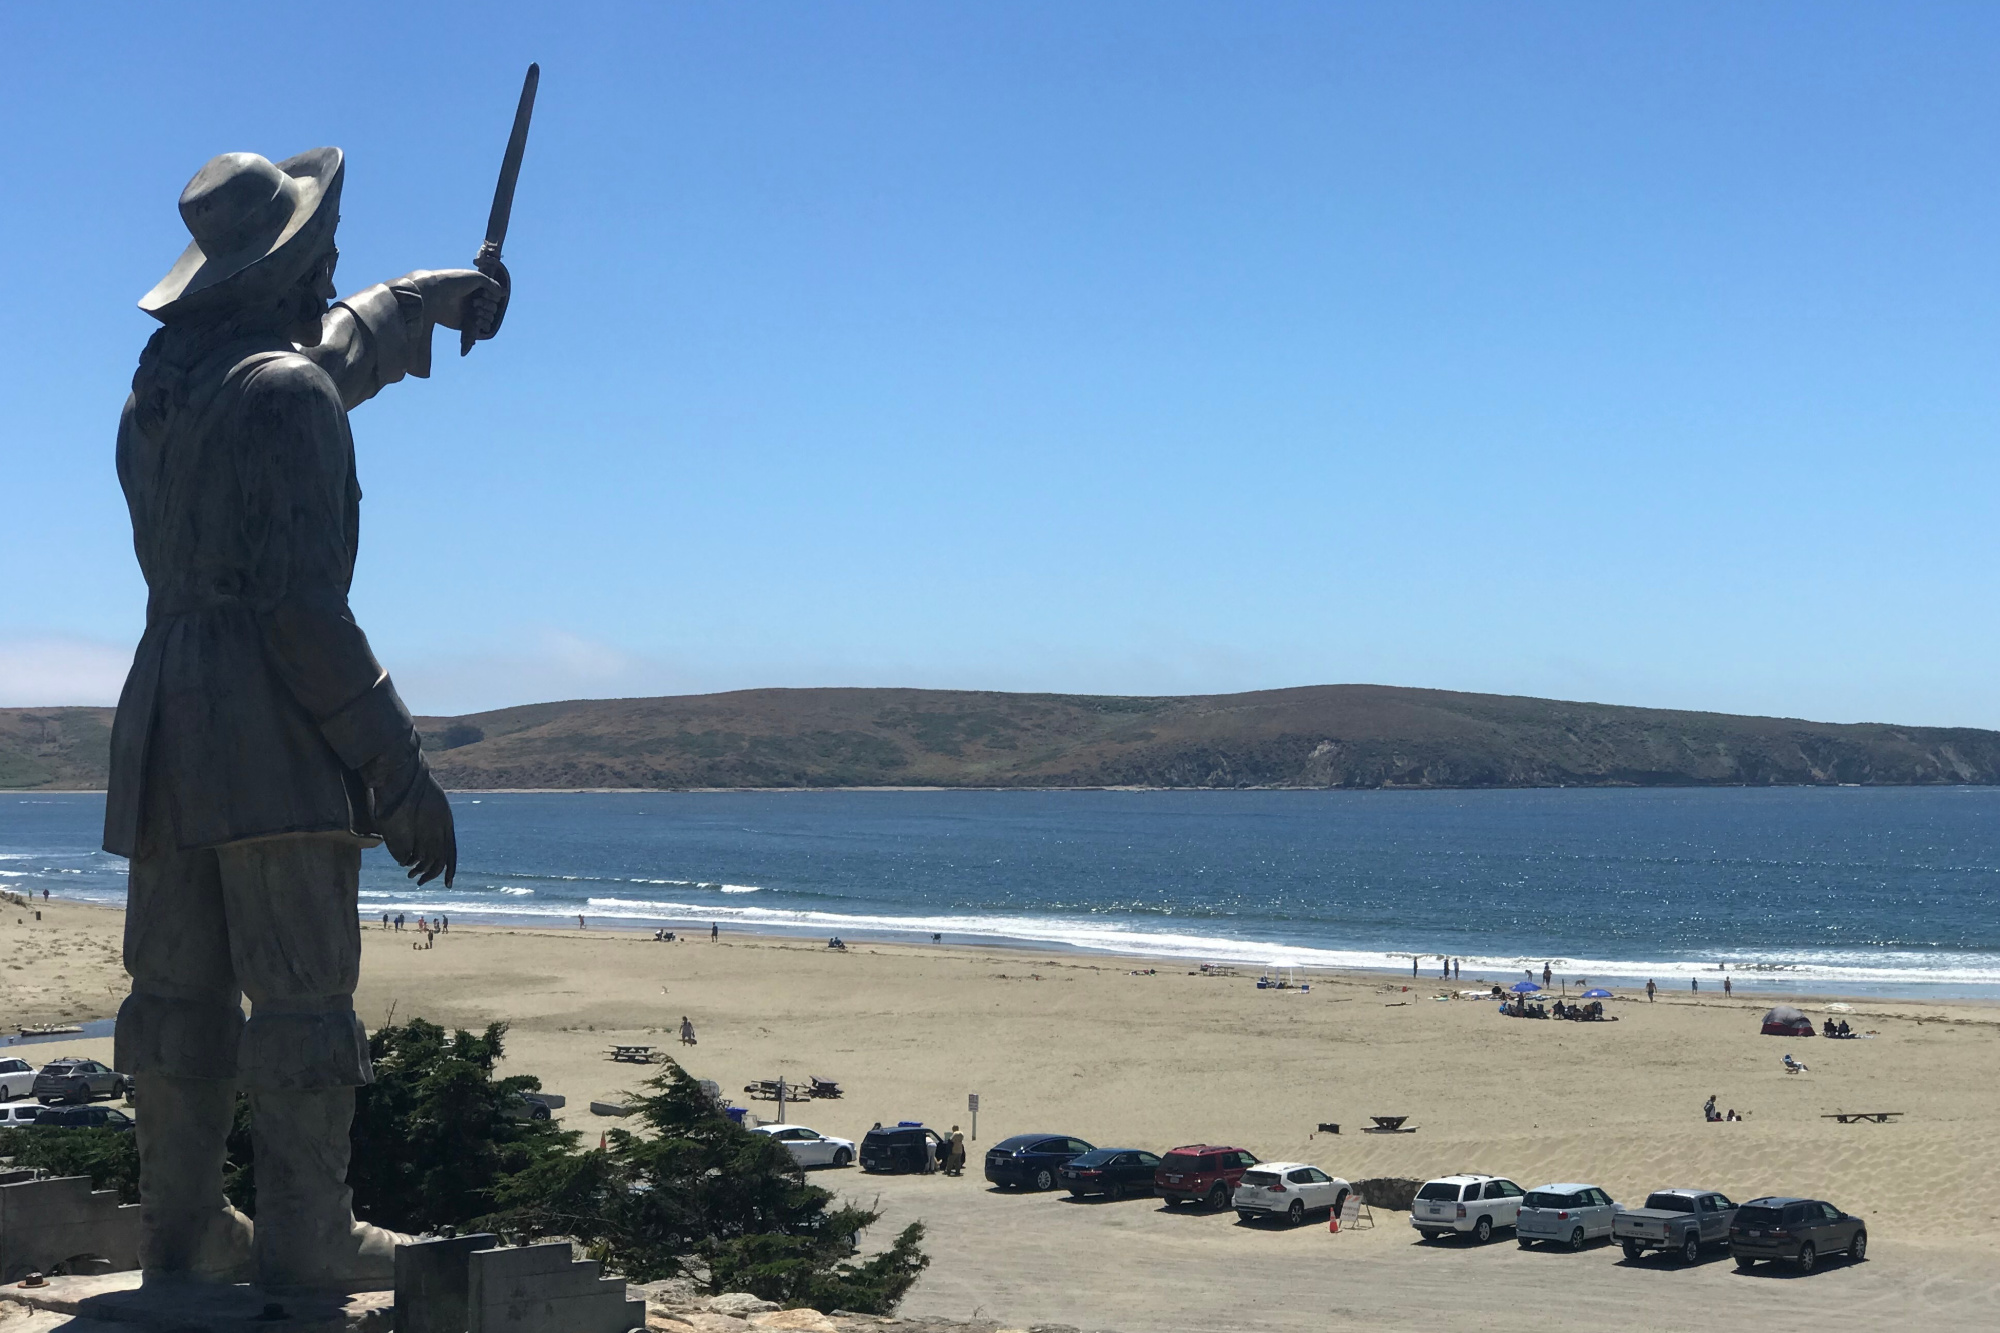 A statue raising a sword over a view of the bay.